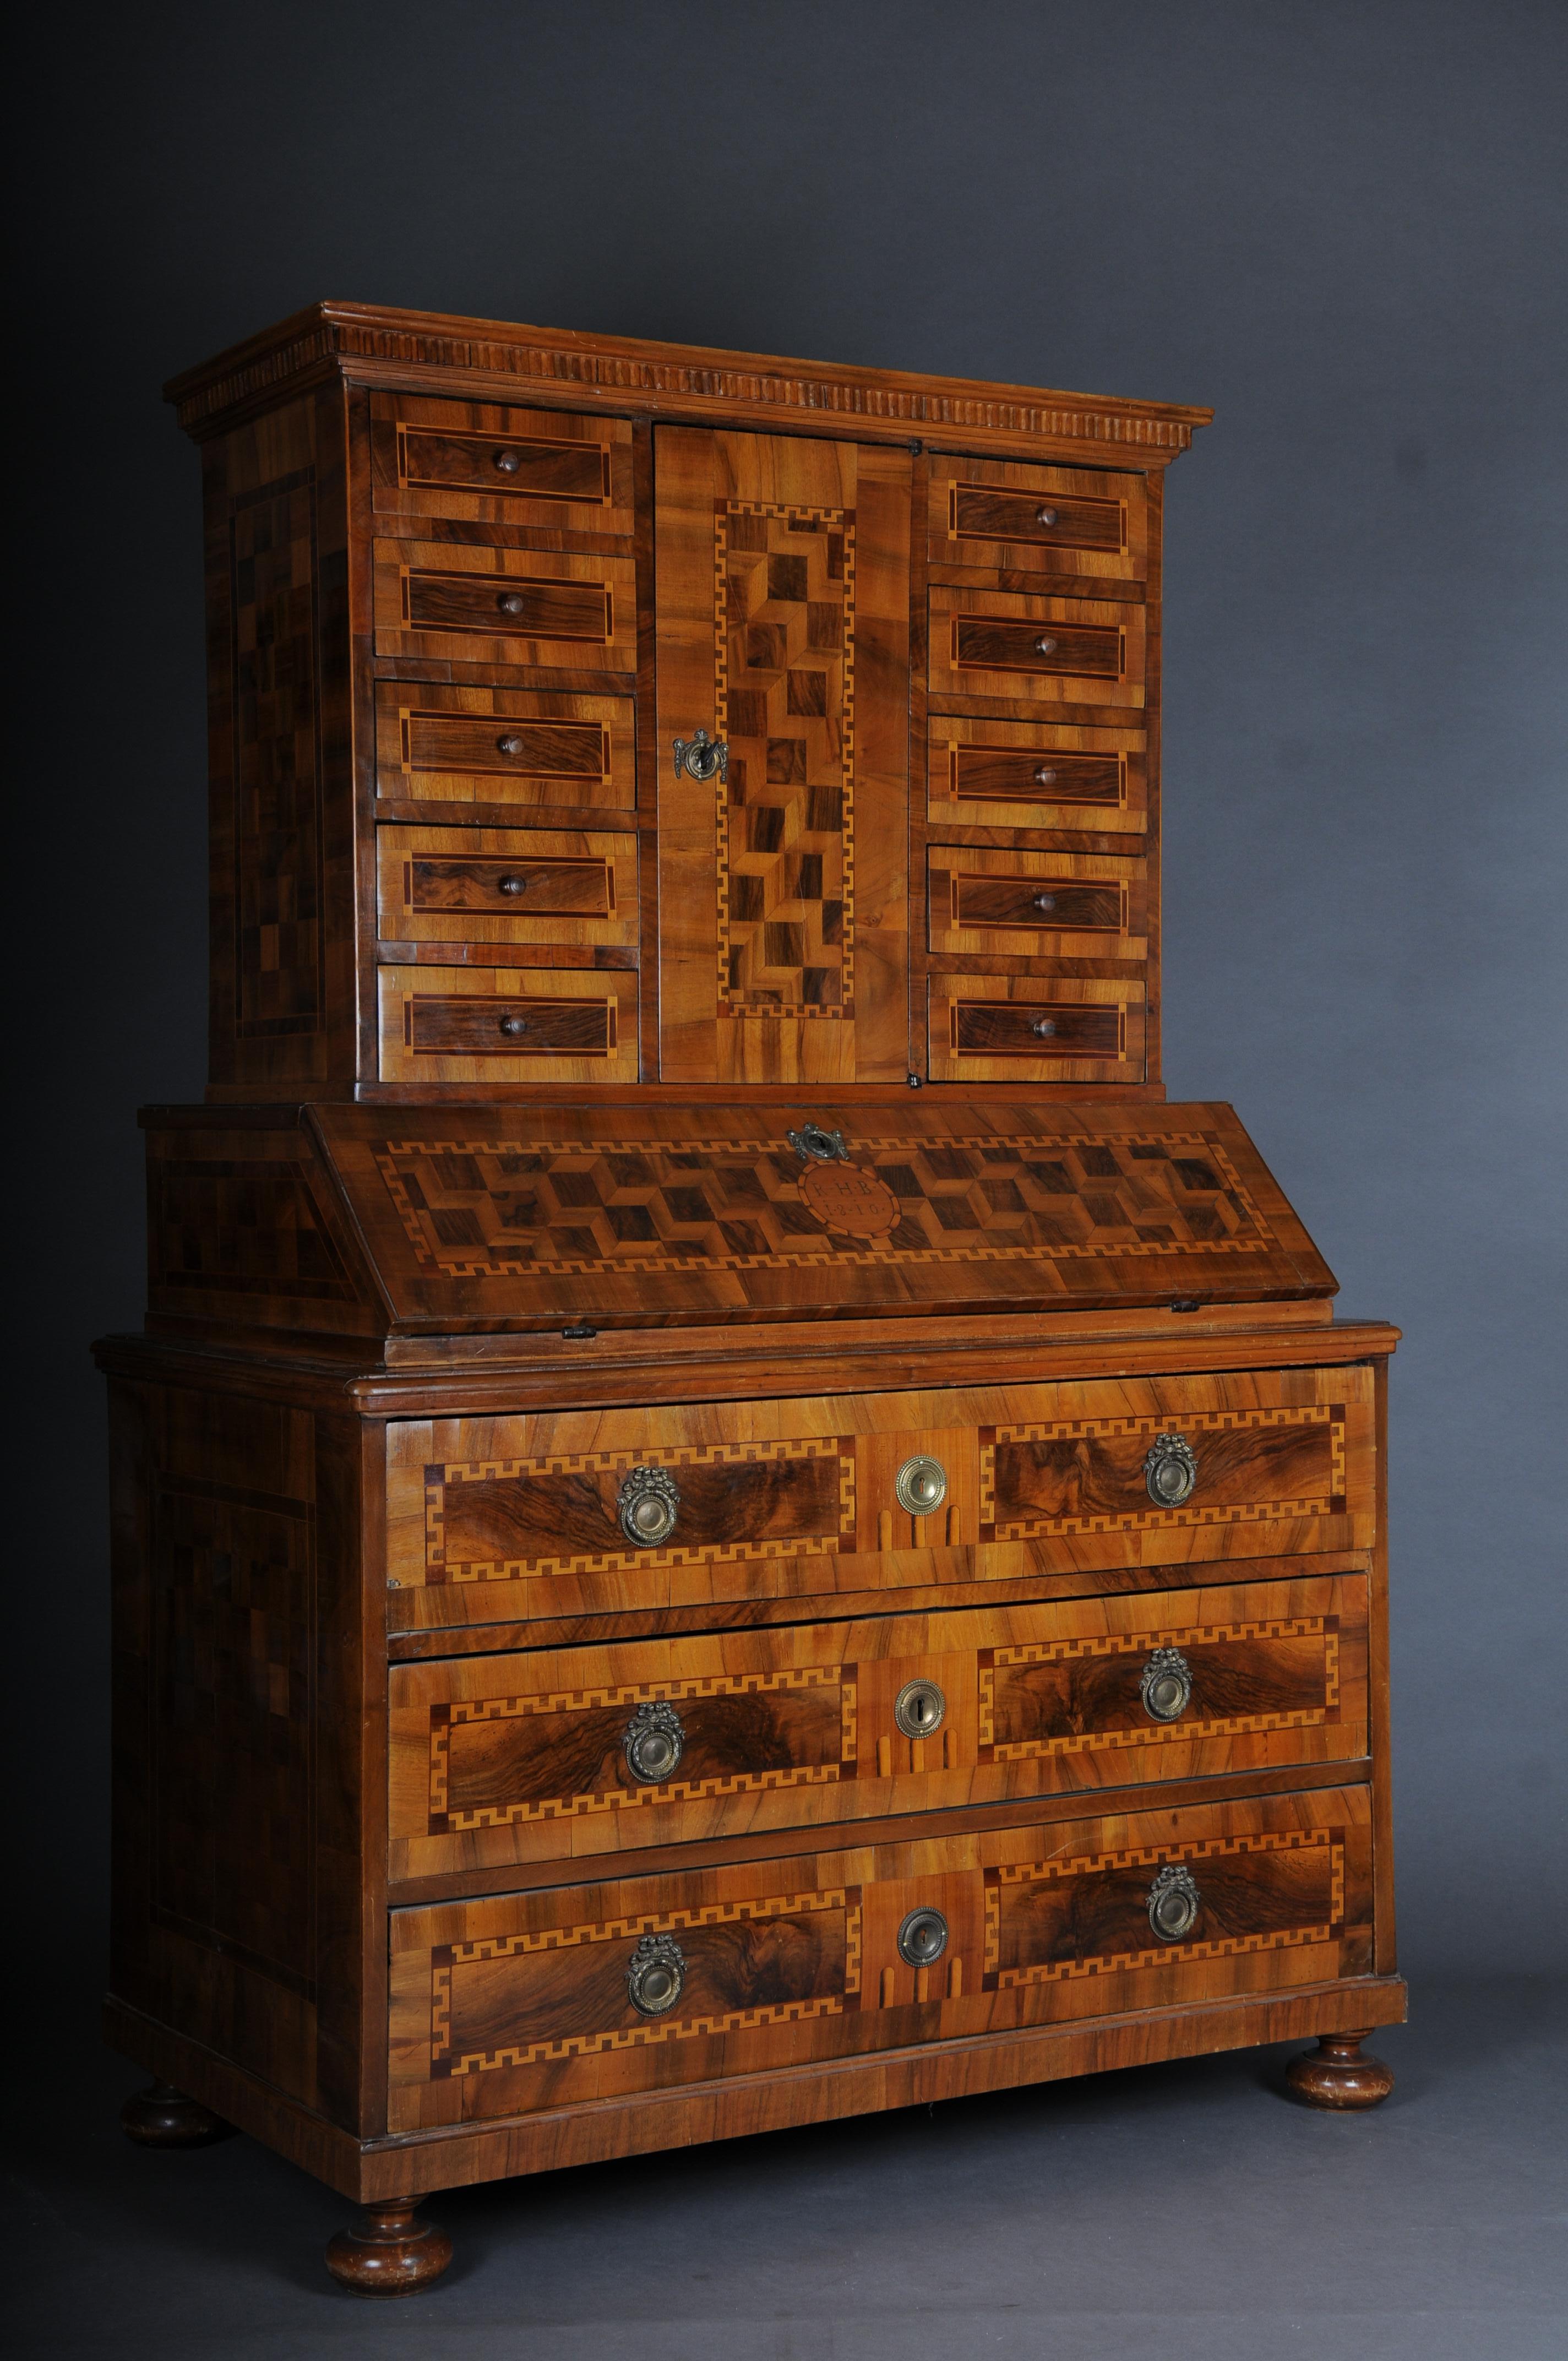 Museum essay/tabernacle around 1810, walnut.

Extremely rare and high-quality tabernacle with very elaborate and rich inlaid marquetry in walnut/root veneer on fir wood.
High construction consisting of 3 elements. The tabernacle has many drawers